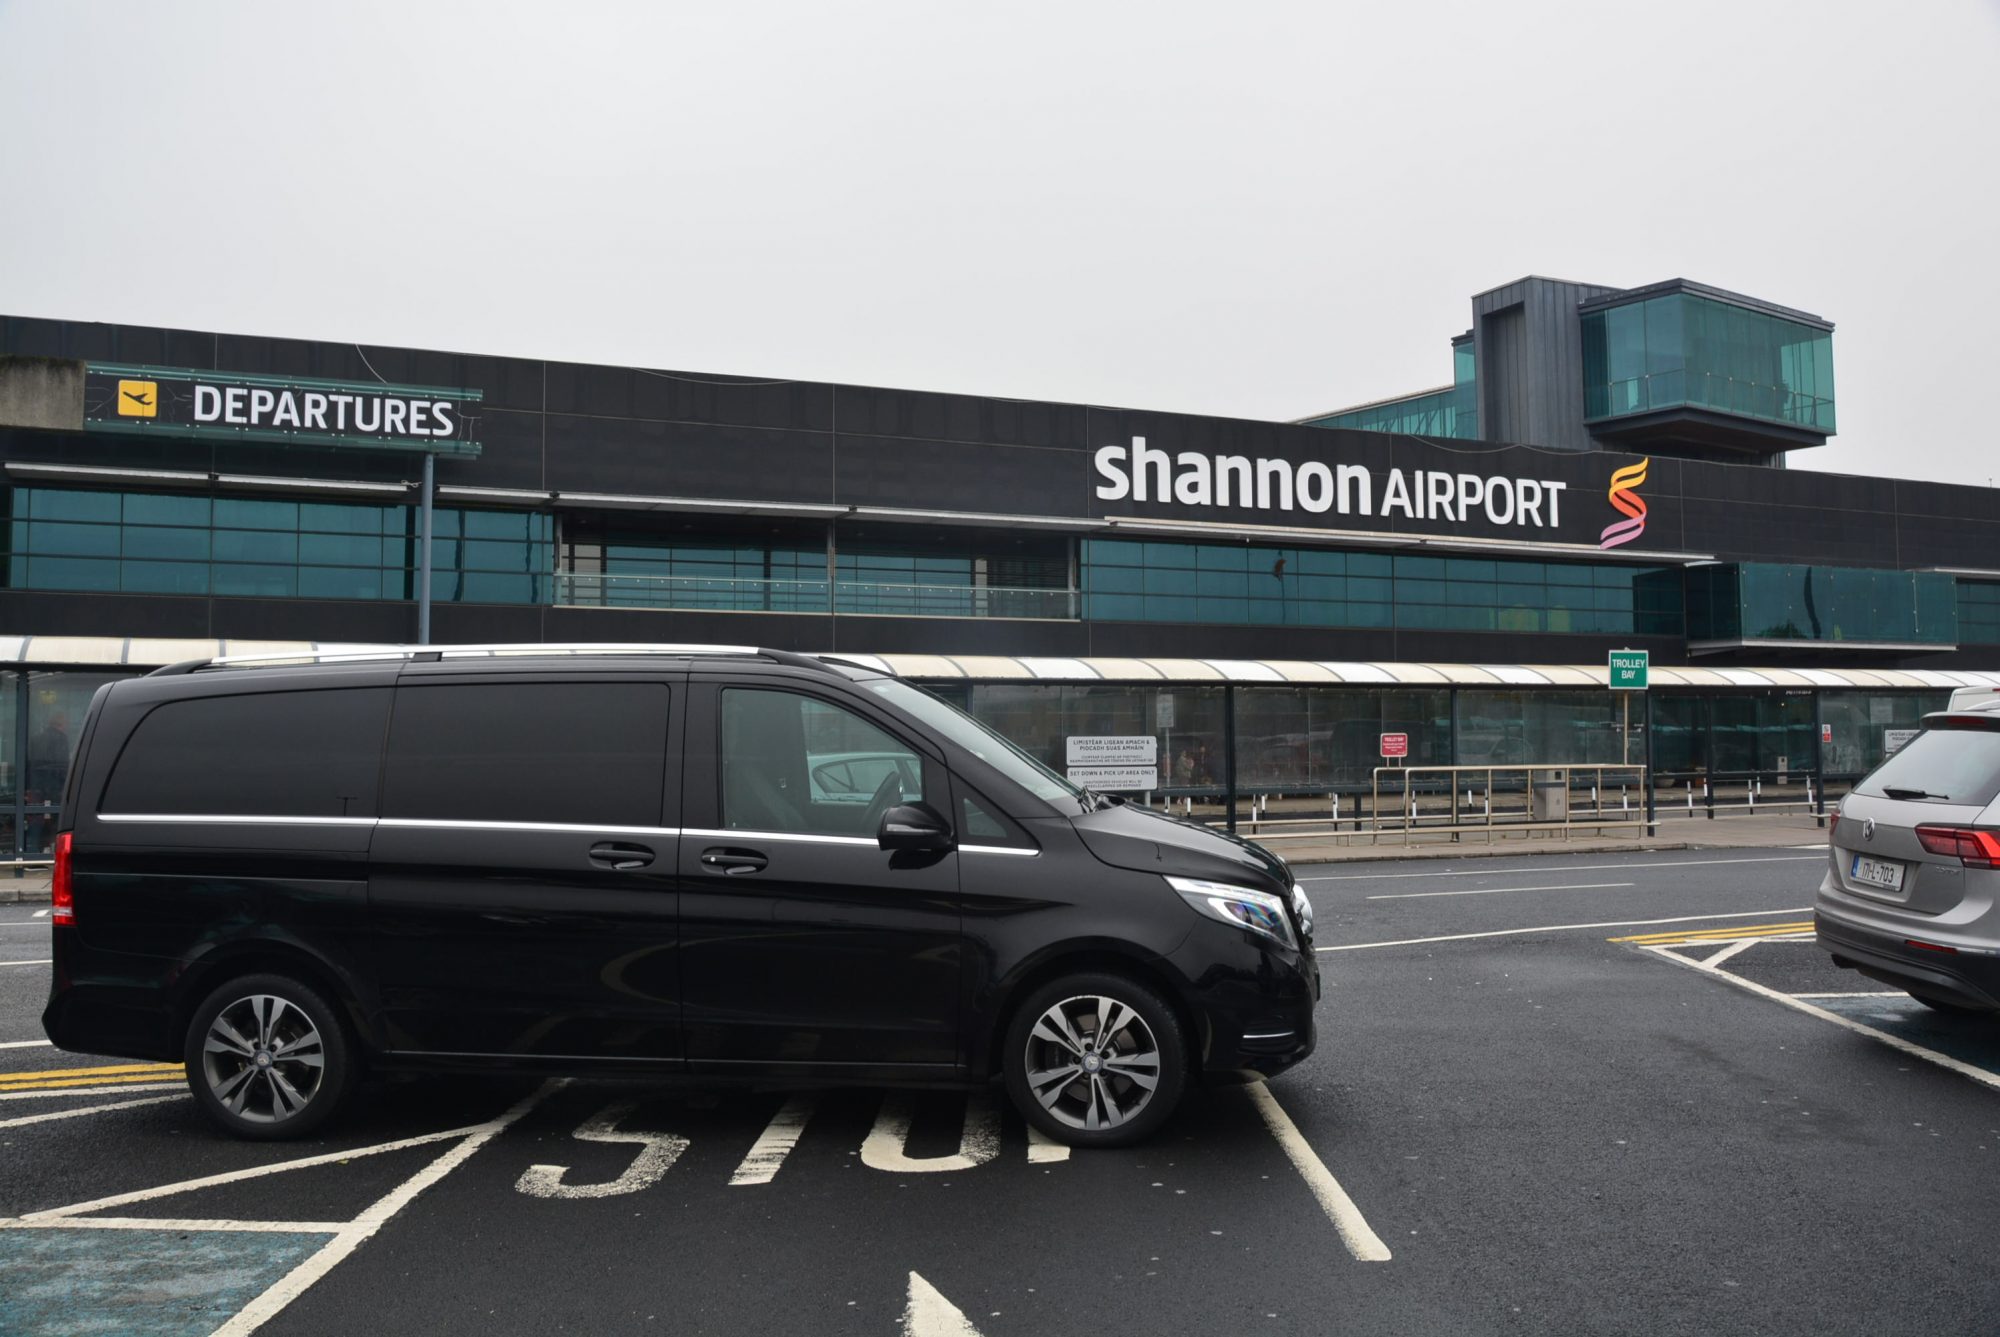 black-mercedes-benz-at-shannon-airport-terminal